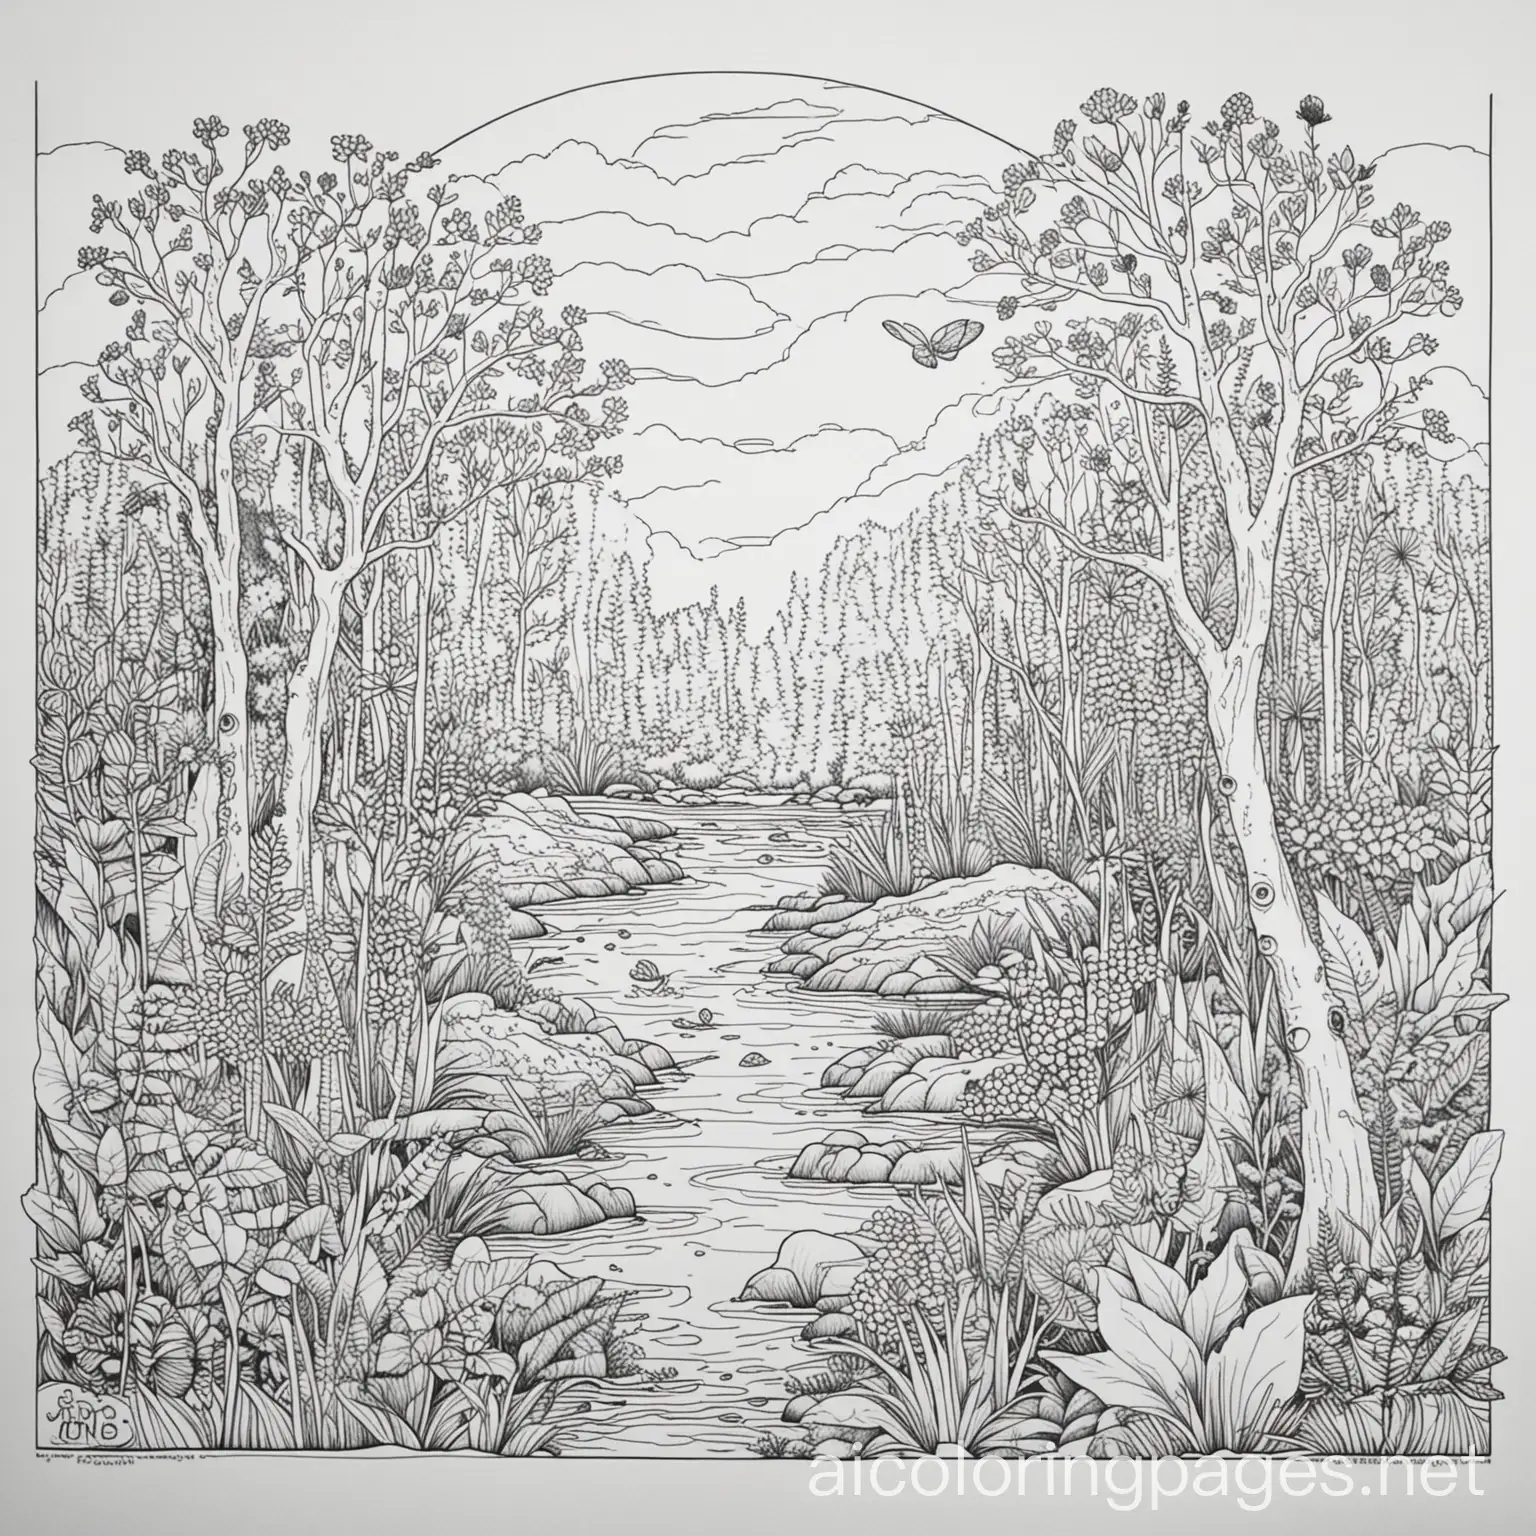 Ecosystem-Coloring-Page-for-Kids-Simplified-Black-and-White-Line-Art